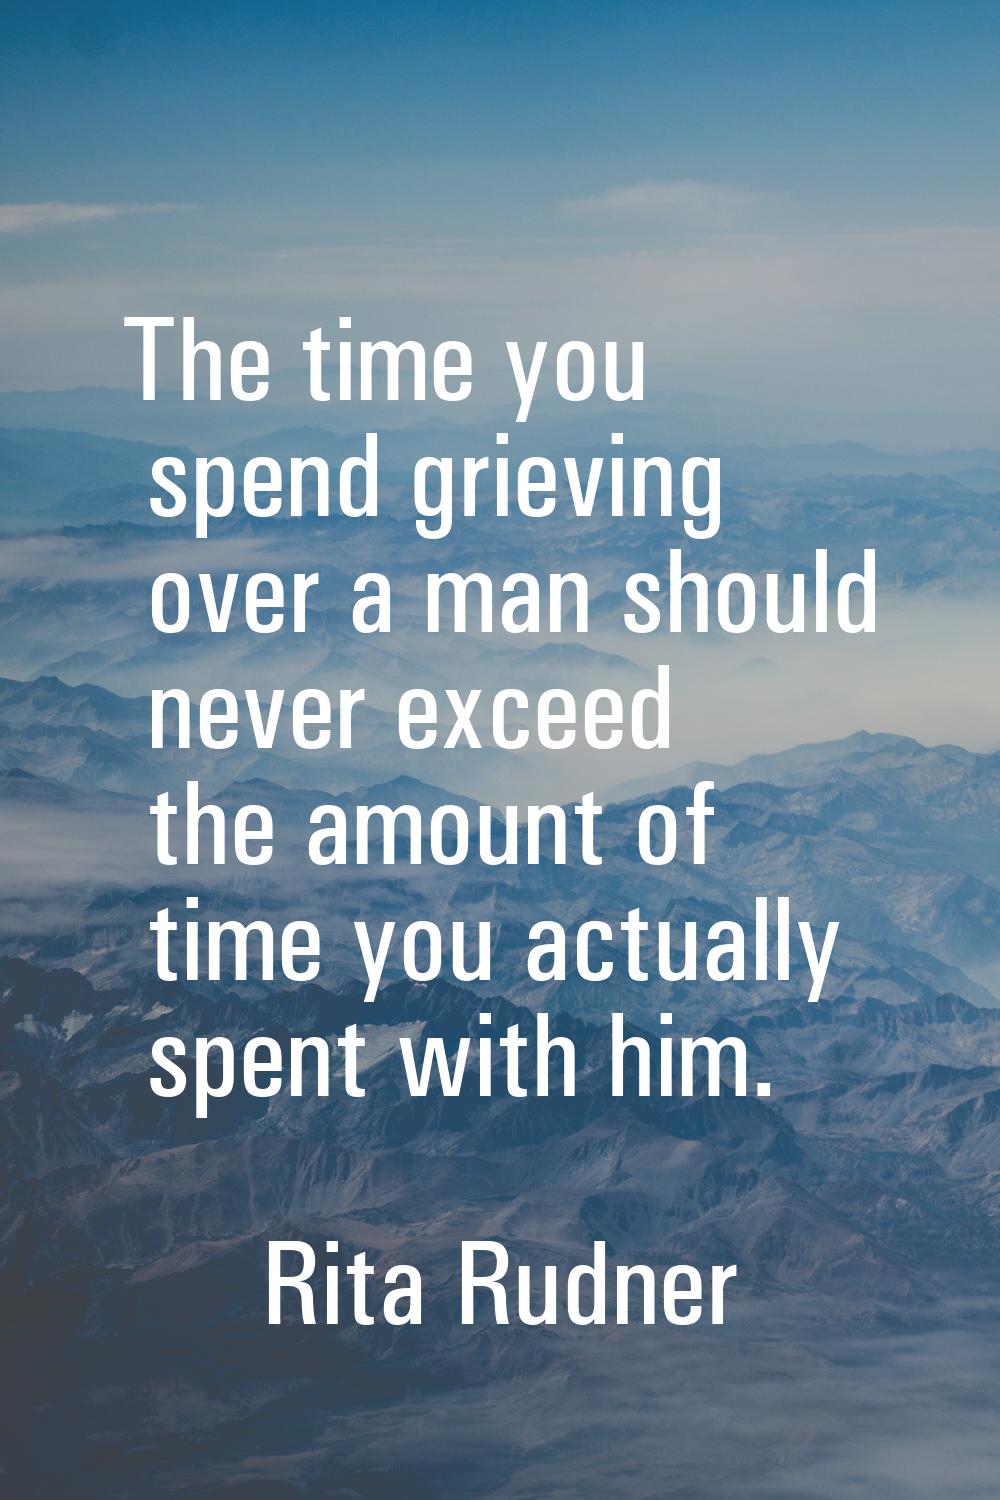 The time you spend grieving over a man should never exceed the amount of time you actually spent wi